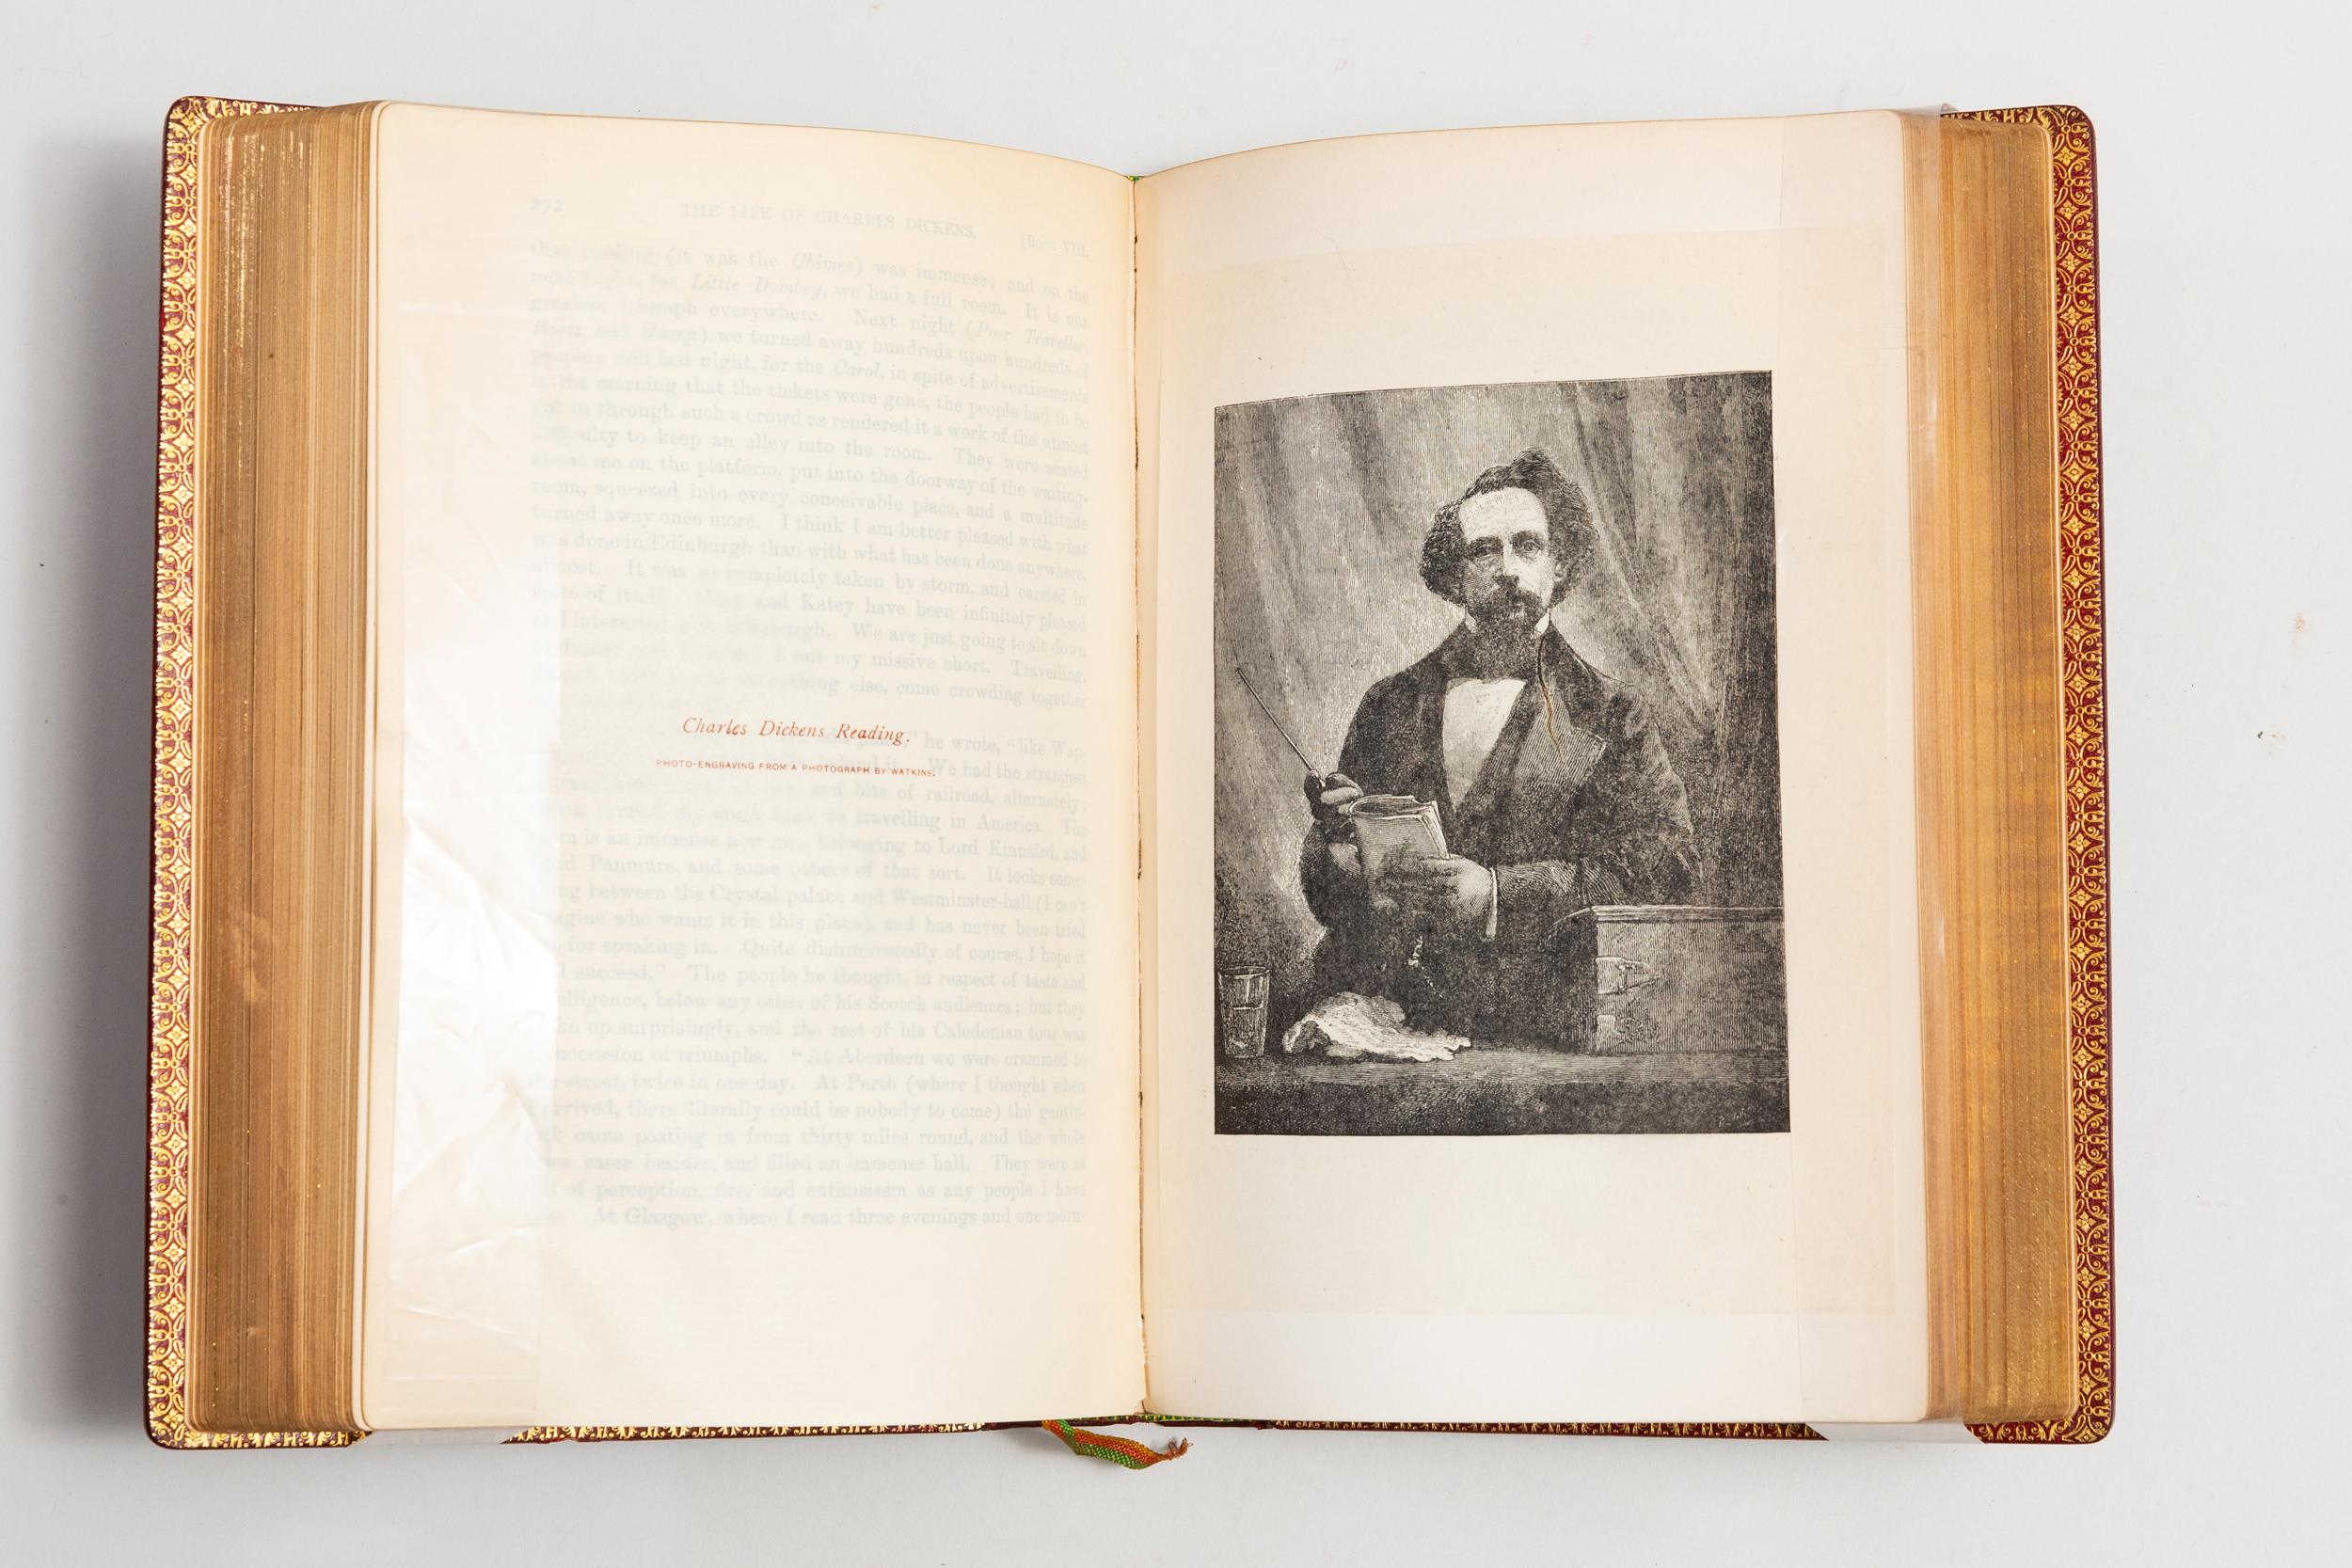 32 Volumes. Charles Dickens, The Works of Charles Dickens 3